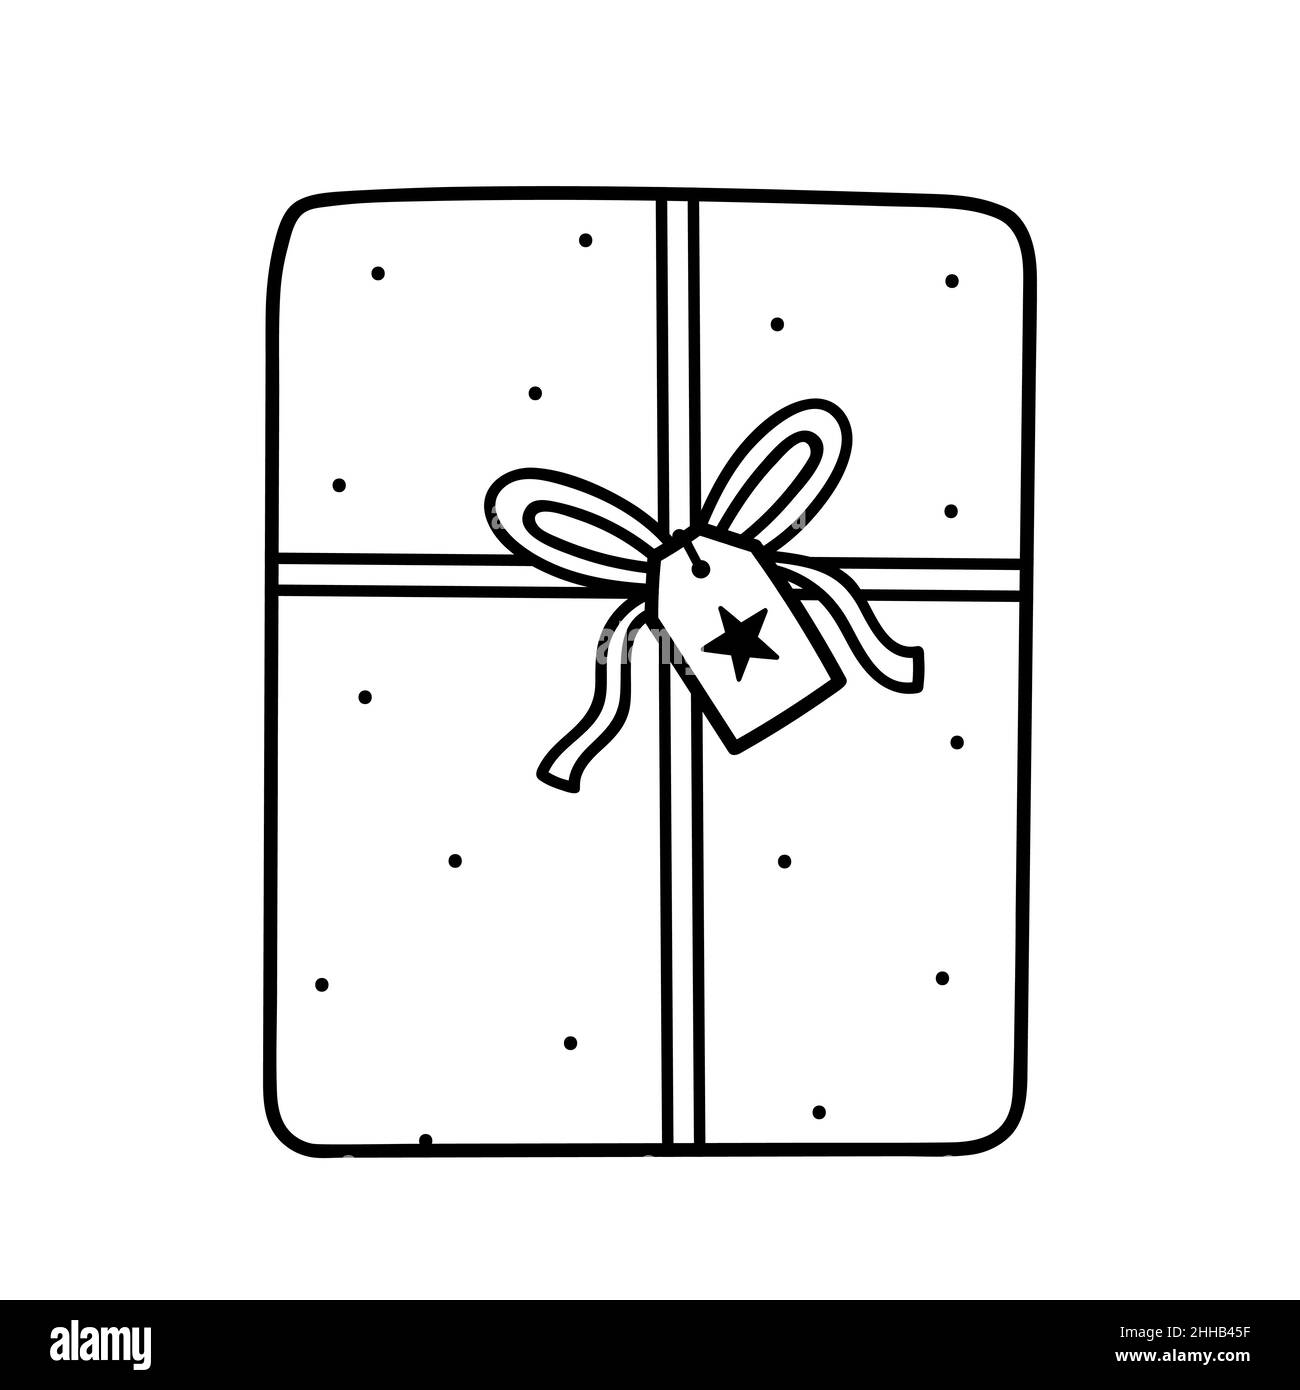 https://c8.alamy.com/comp/2HHB45F/cute-wrapped-gift-with-a-bow-and-a-label-isolated-on-white-background-vector-hand-drawn-illustration-in-doodle-style-2HHB45F.jpg